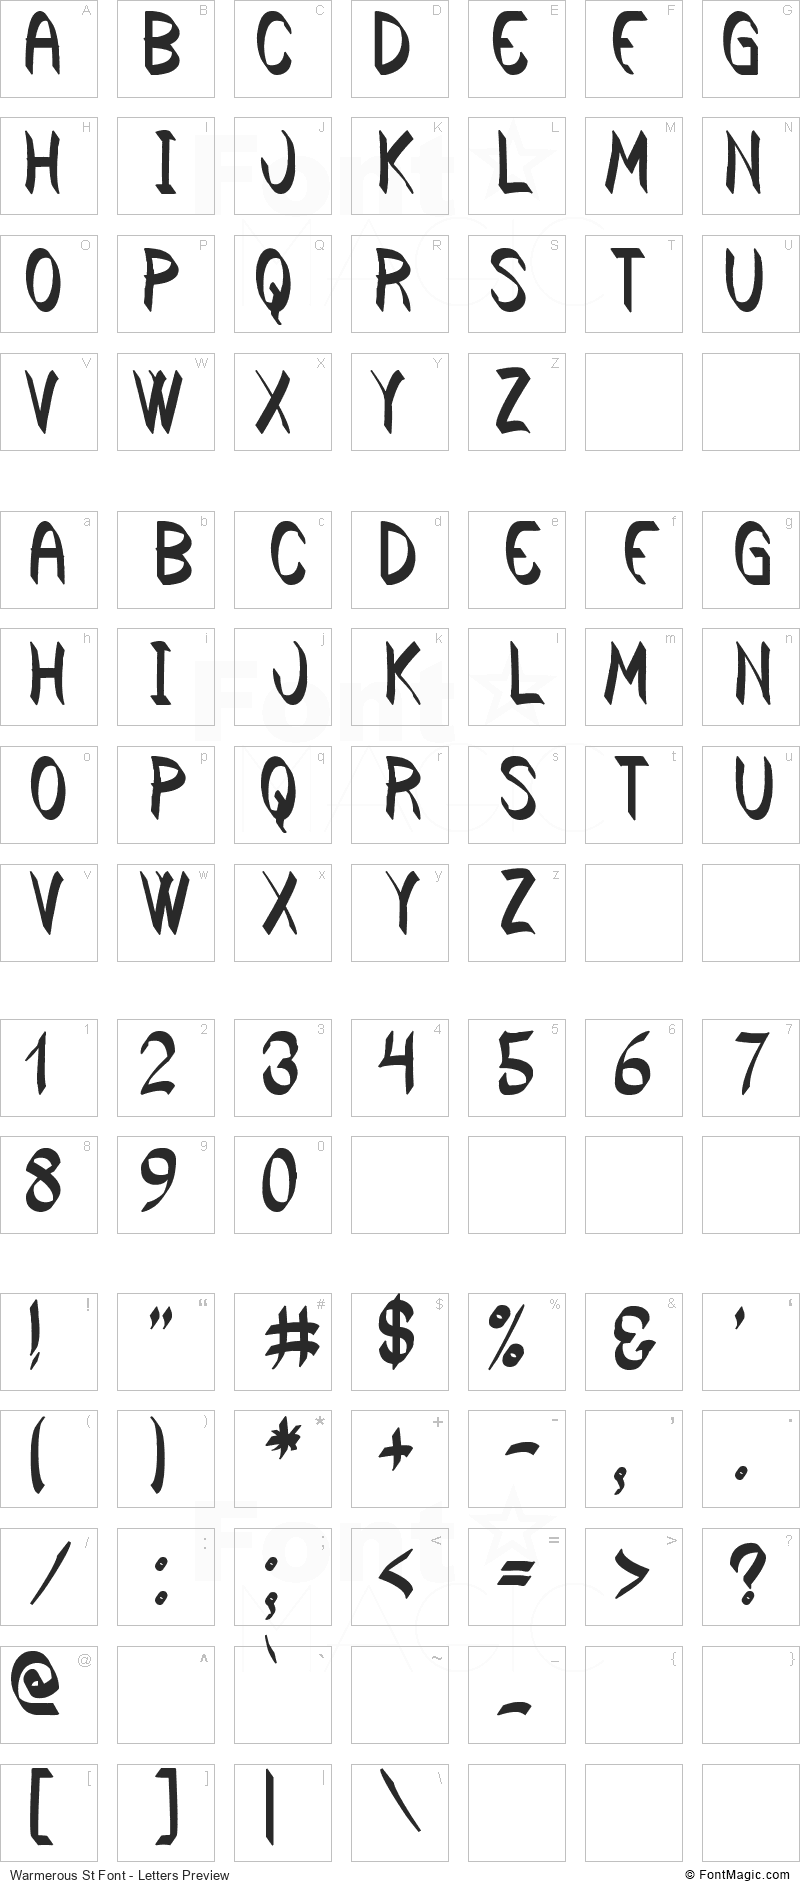 Warmerous St Font - All Latters Preview Chart